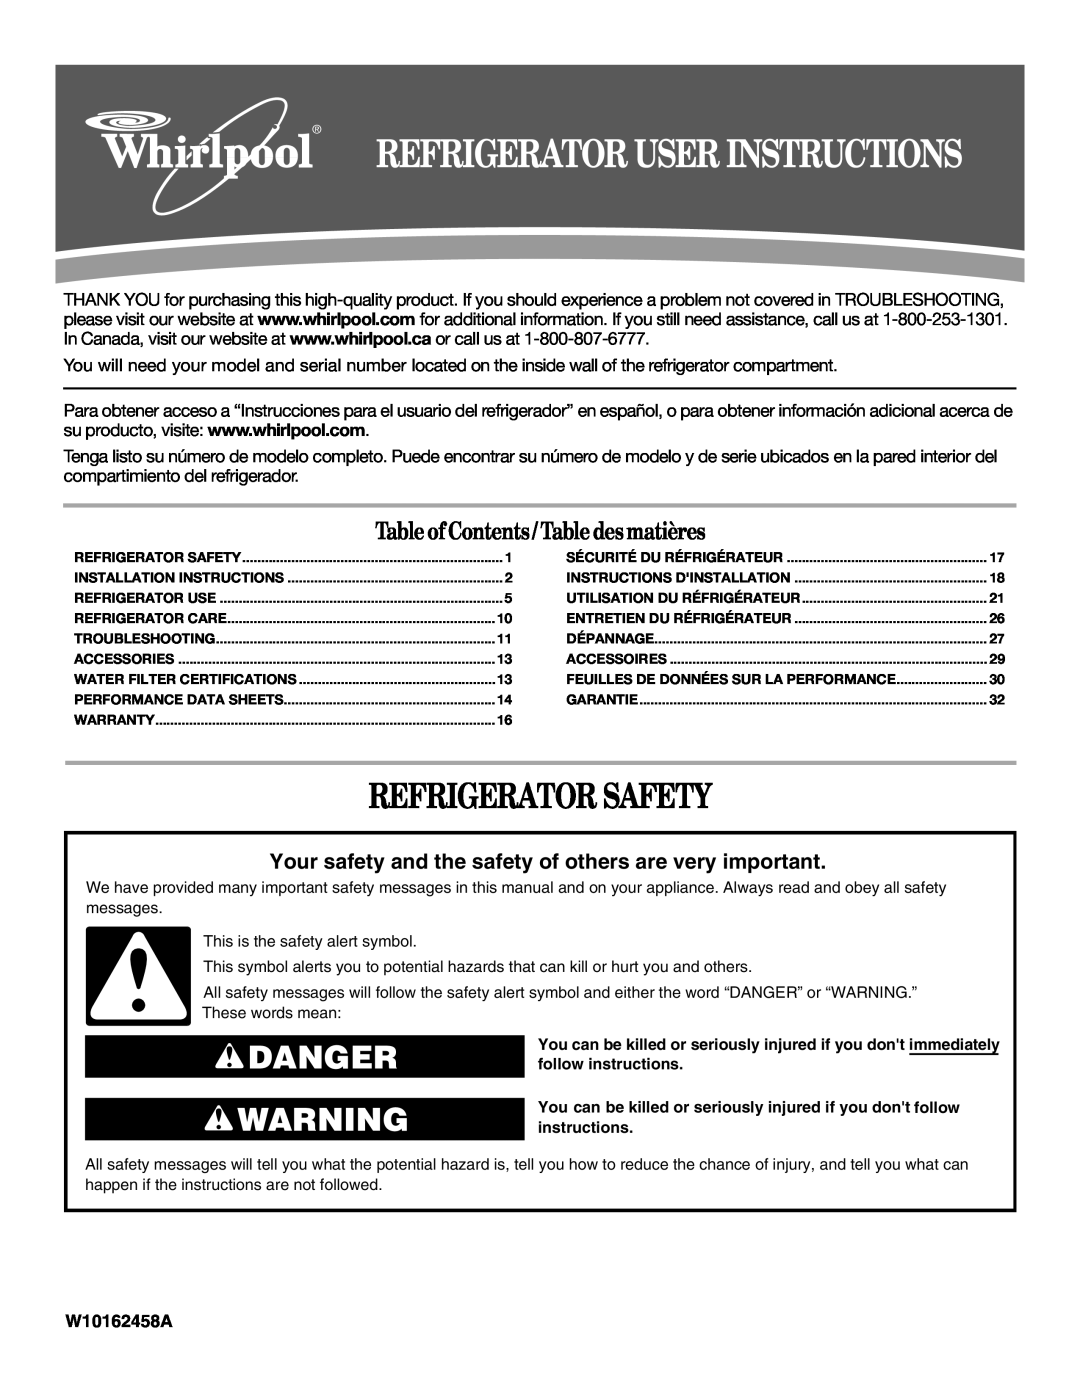 Whirlpool W10162458A installation instructions Refrigerator Safety, Danger, Table of Contents / Table desmatières 